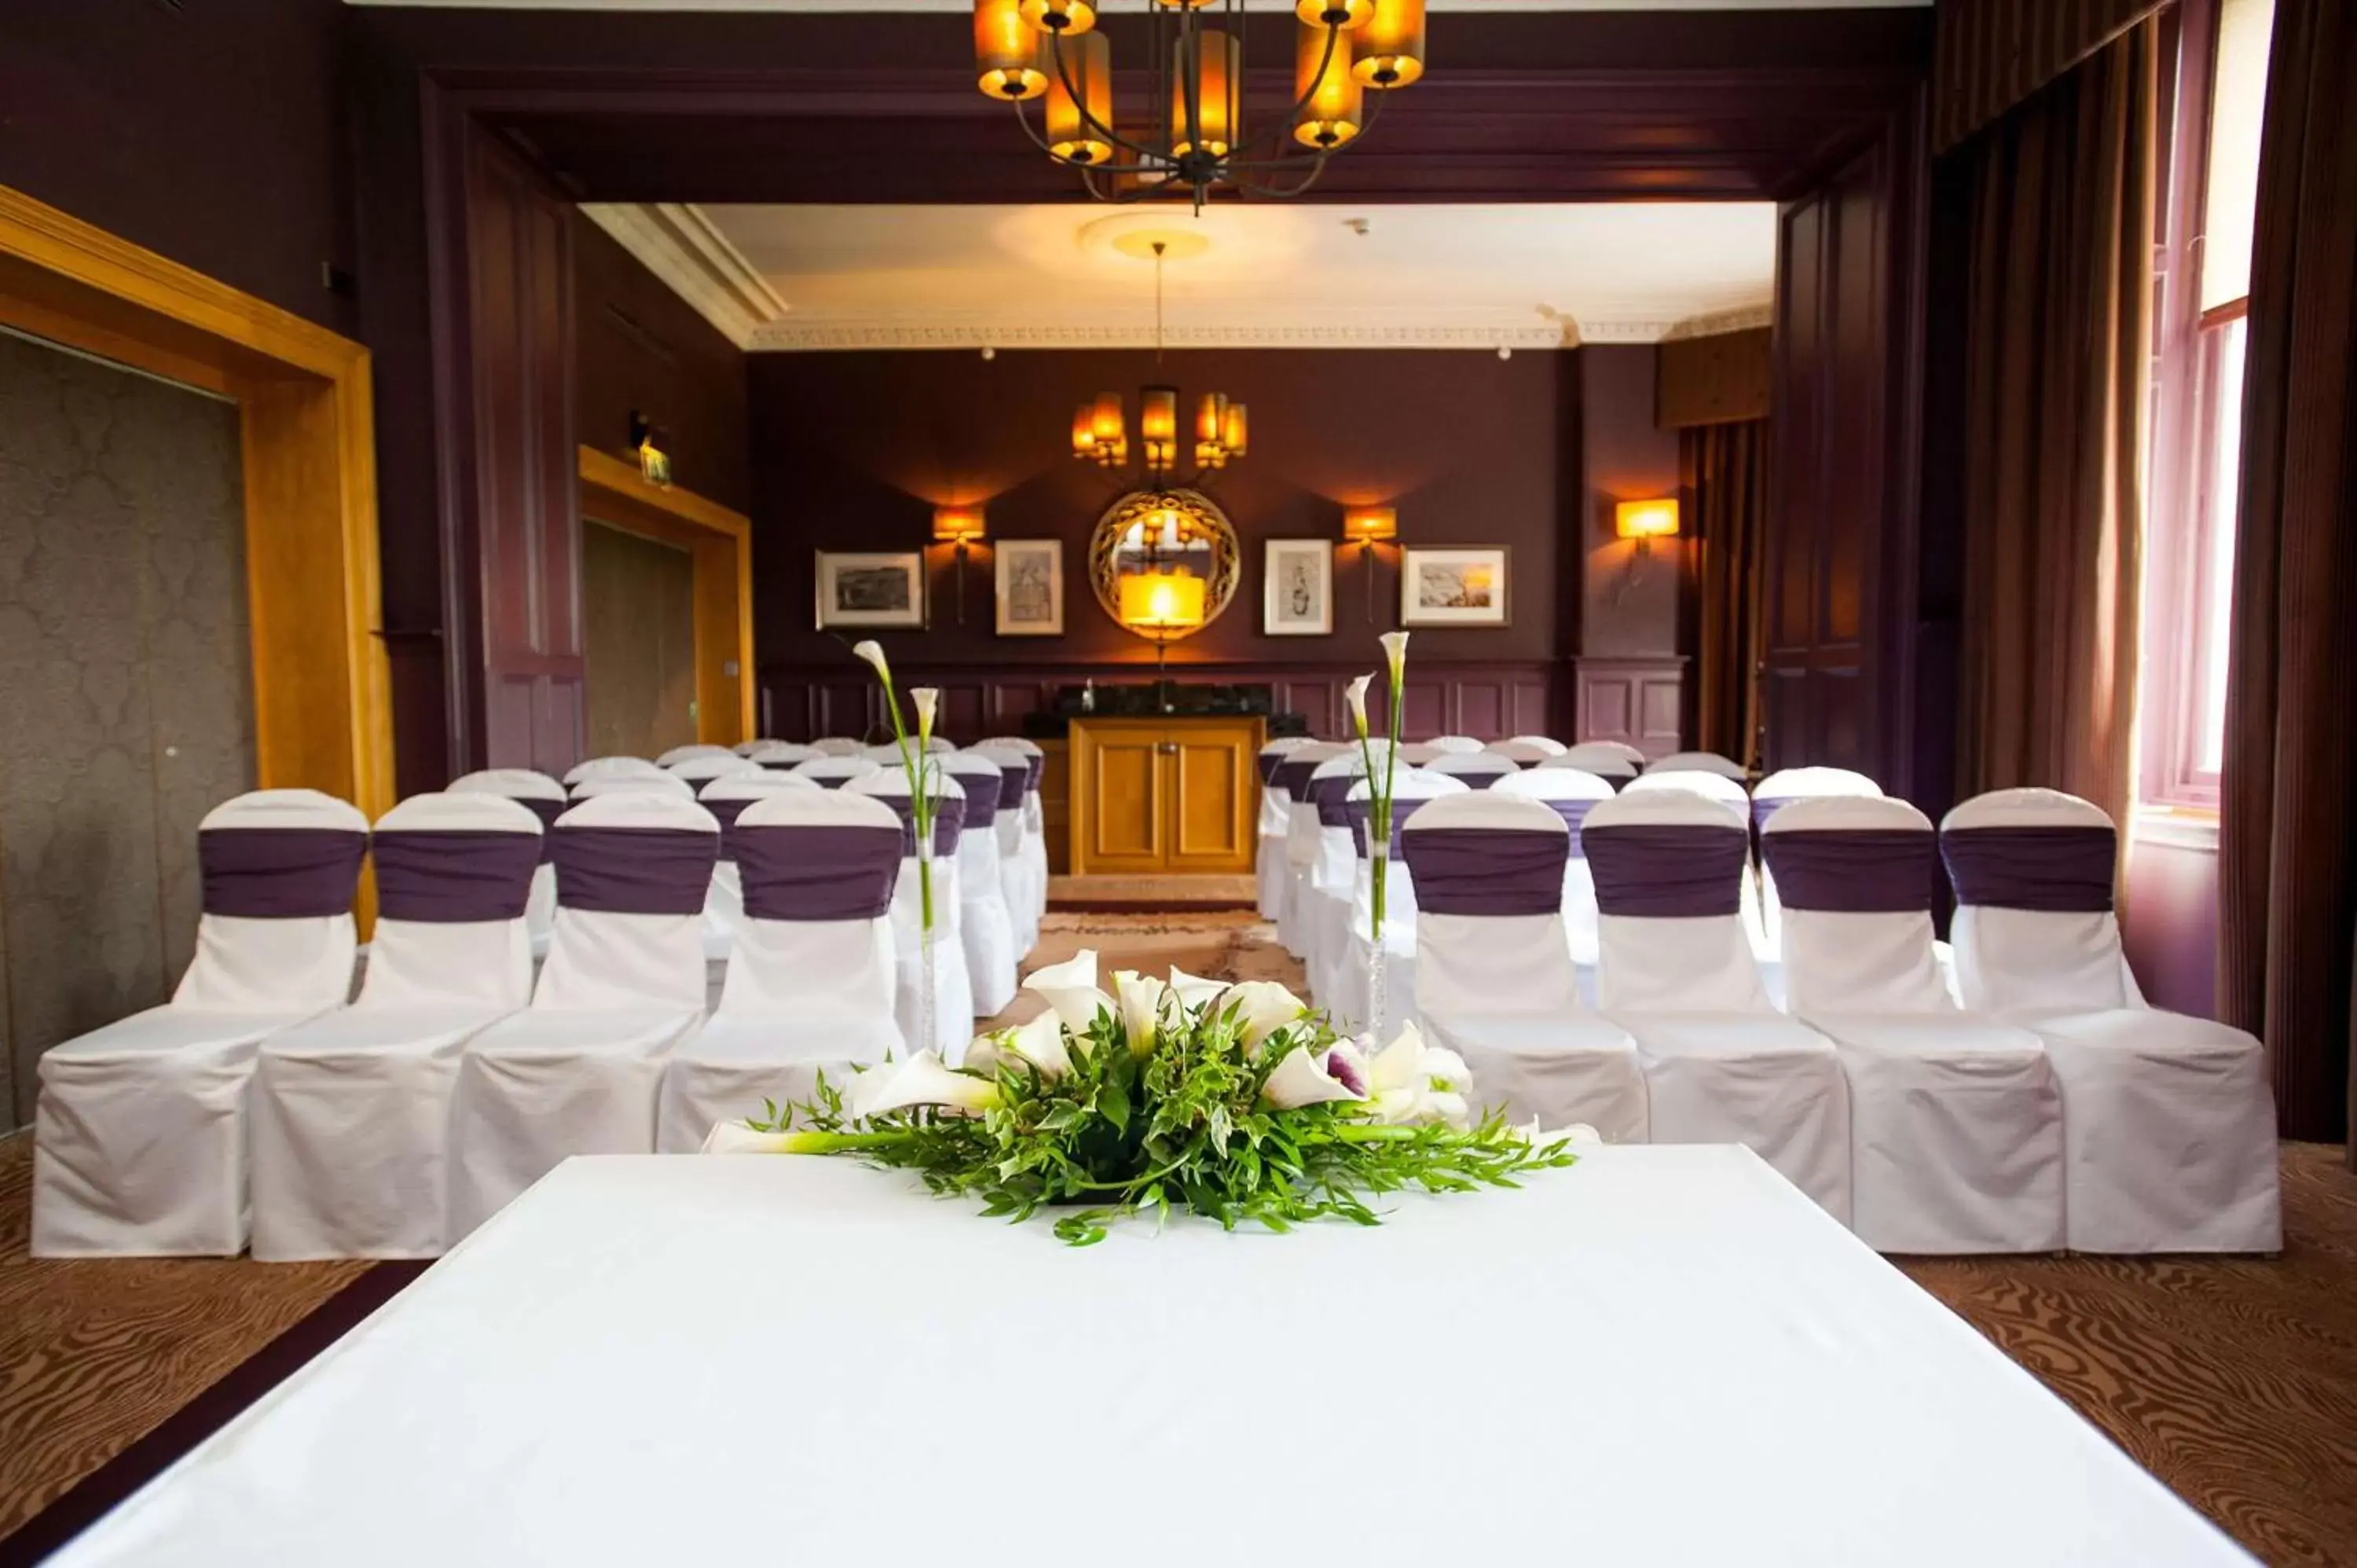 Meeting/conference room, Banquet Facilities in DoubleTree by Hilton Dunblane Hydro Hotel